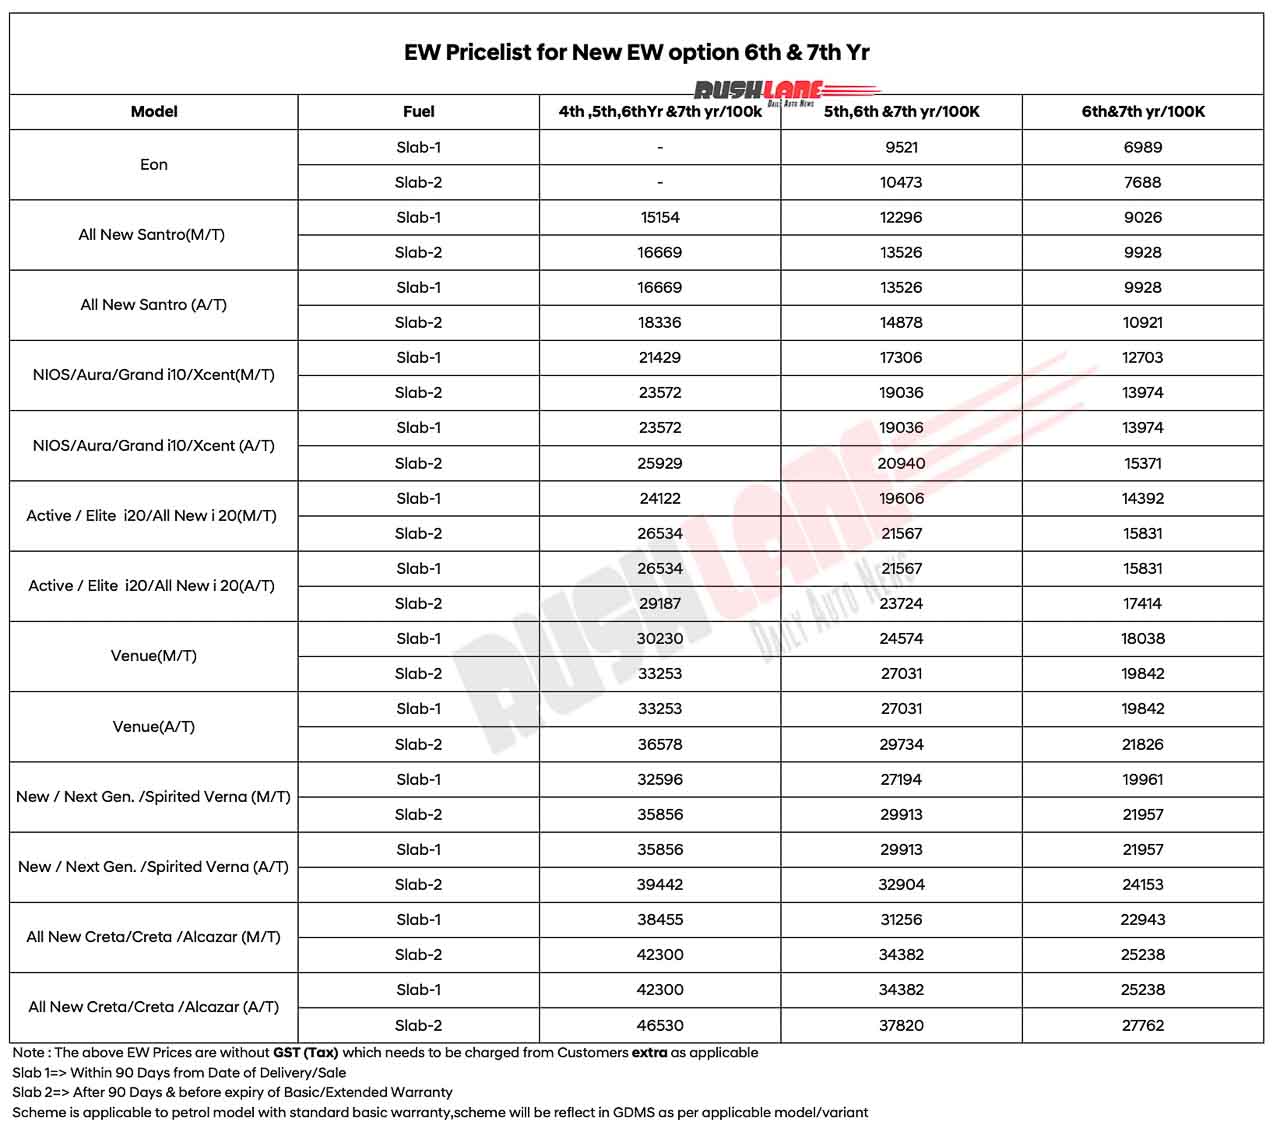 Hyundai 7 Years Extended Warrant Prices